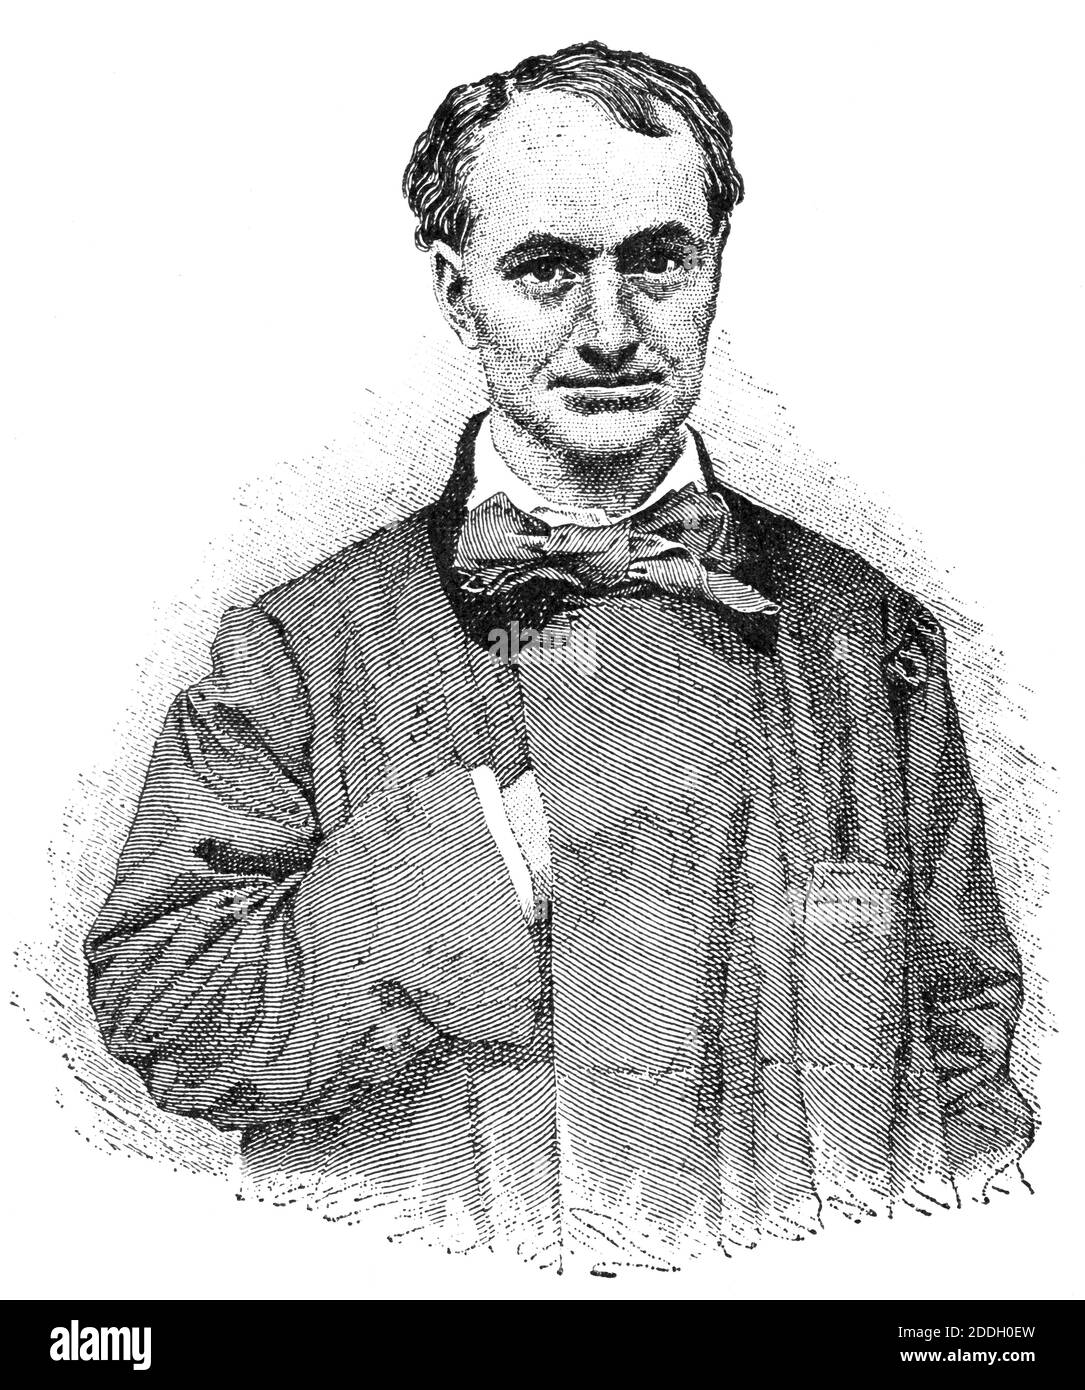 Portrait of Charles Pierre Baudelaire - a French poet, essayist, art critic, and one of the first translators of Edgar Allan Poe. Illustration of the 19th century. White background. Stock Photo